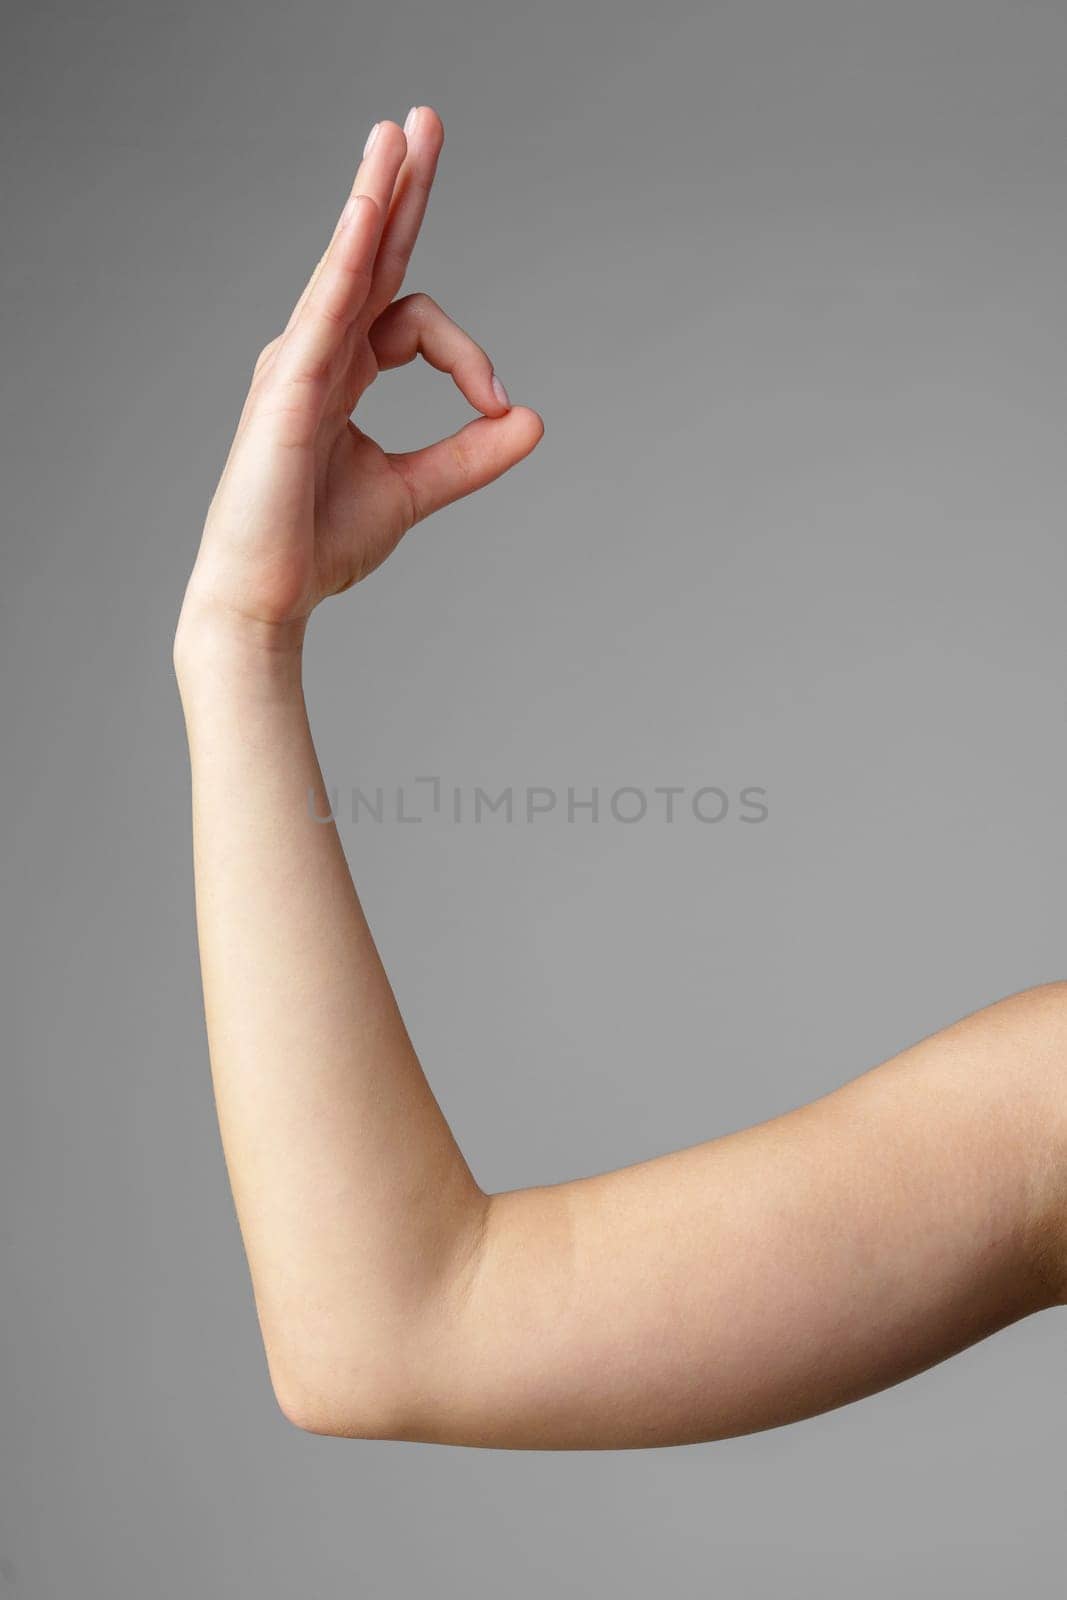 Woman Holding Arm Up in the Air with Gesture by Fabrikasimf